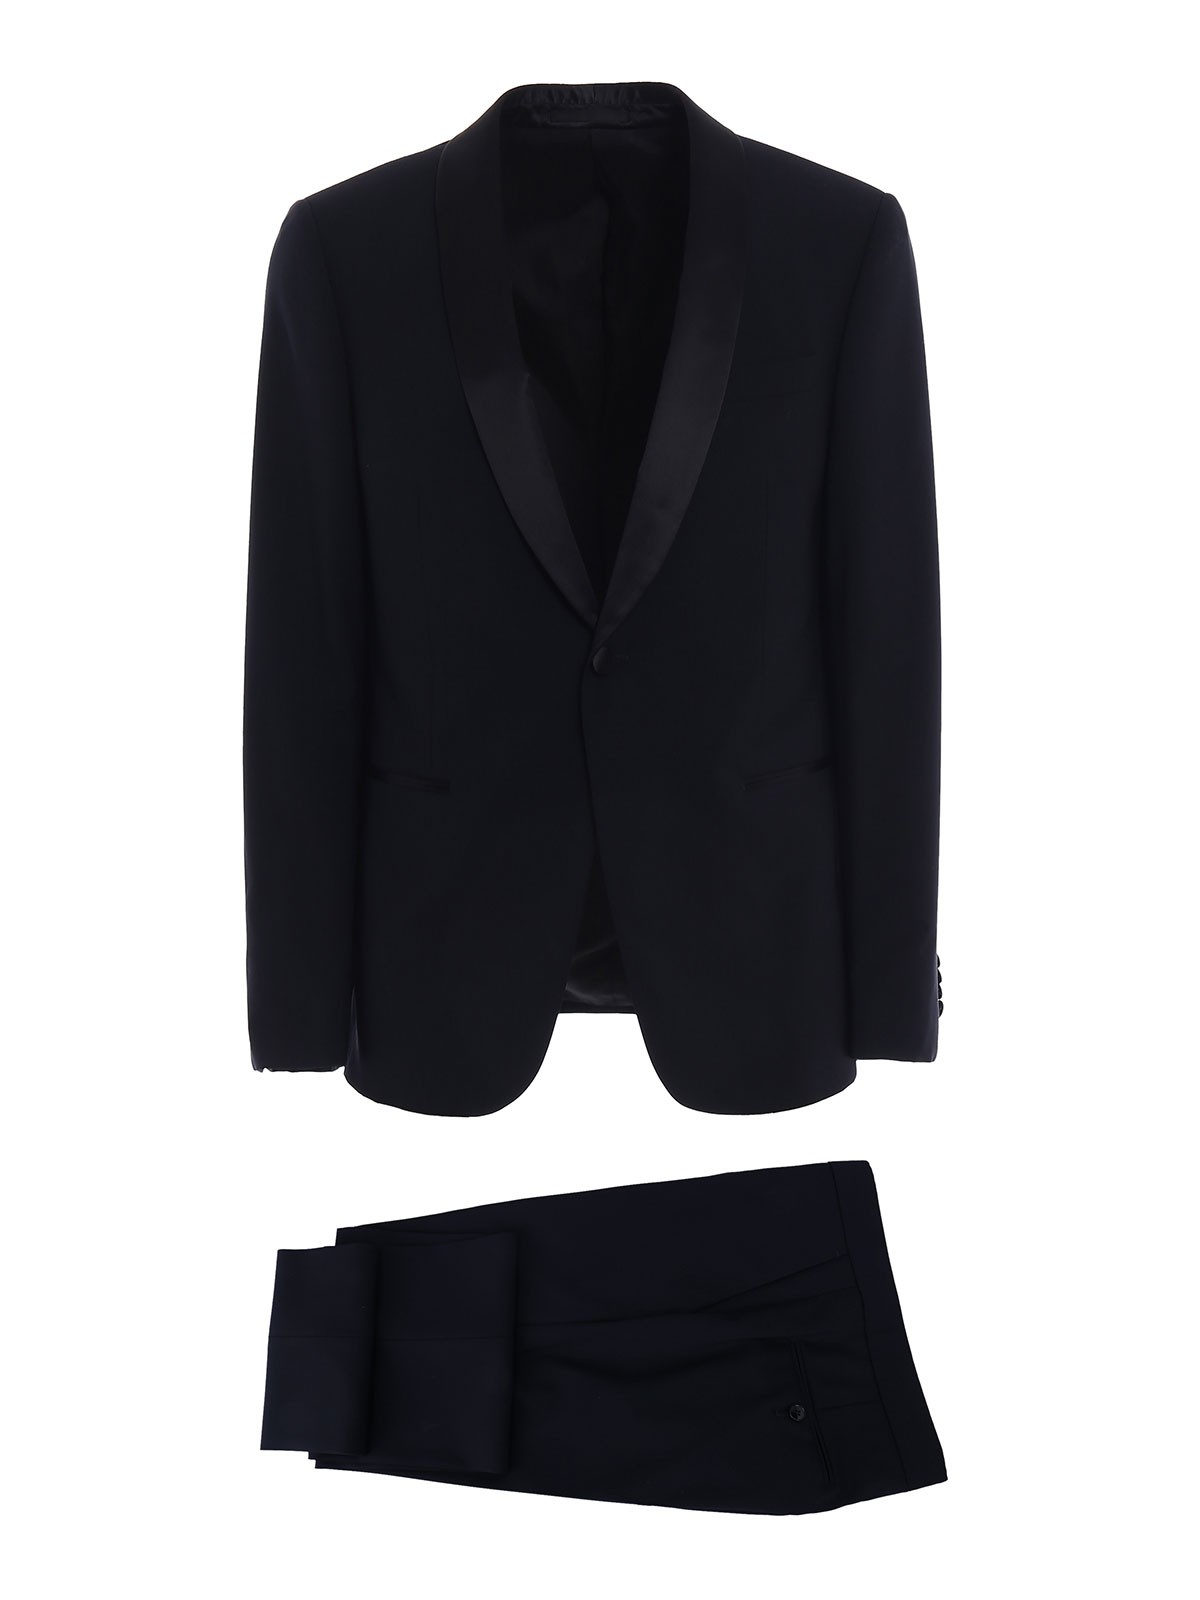 Z Zegna Dinner Suit Turati Shawl Lapels Wool Tuxedo Navy 322836 2830GQ - New Collection Spring Summer 2018